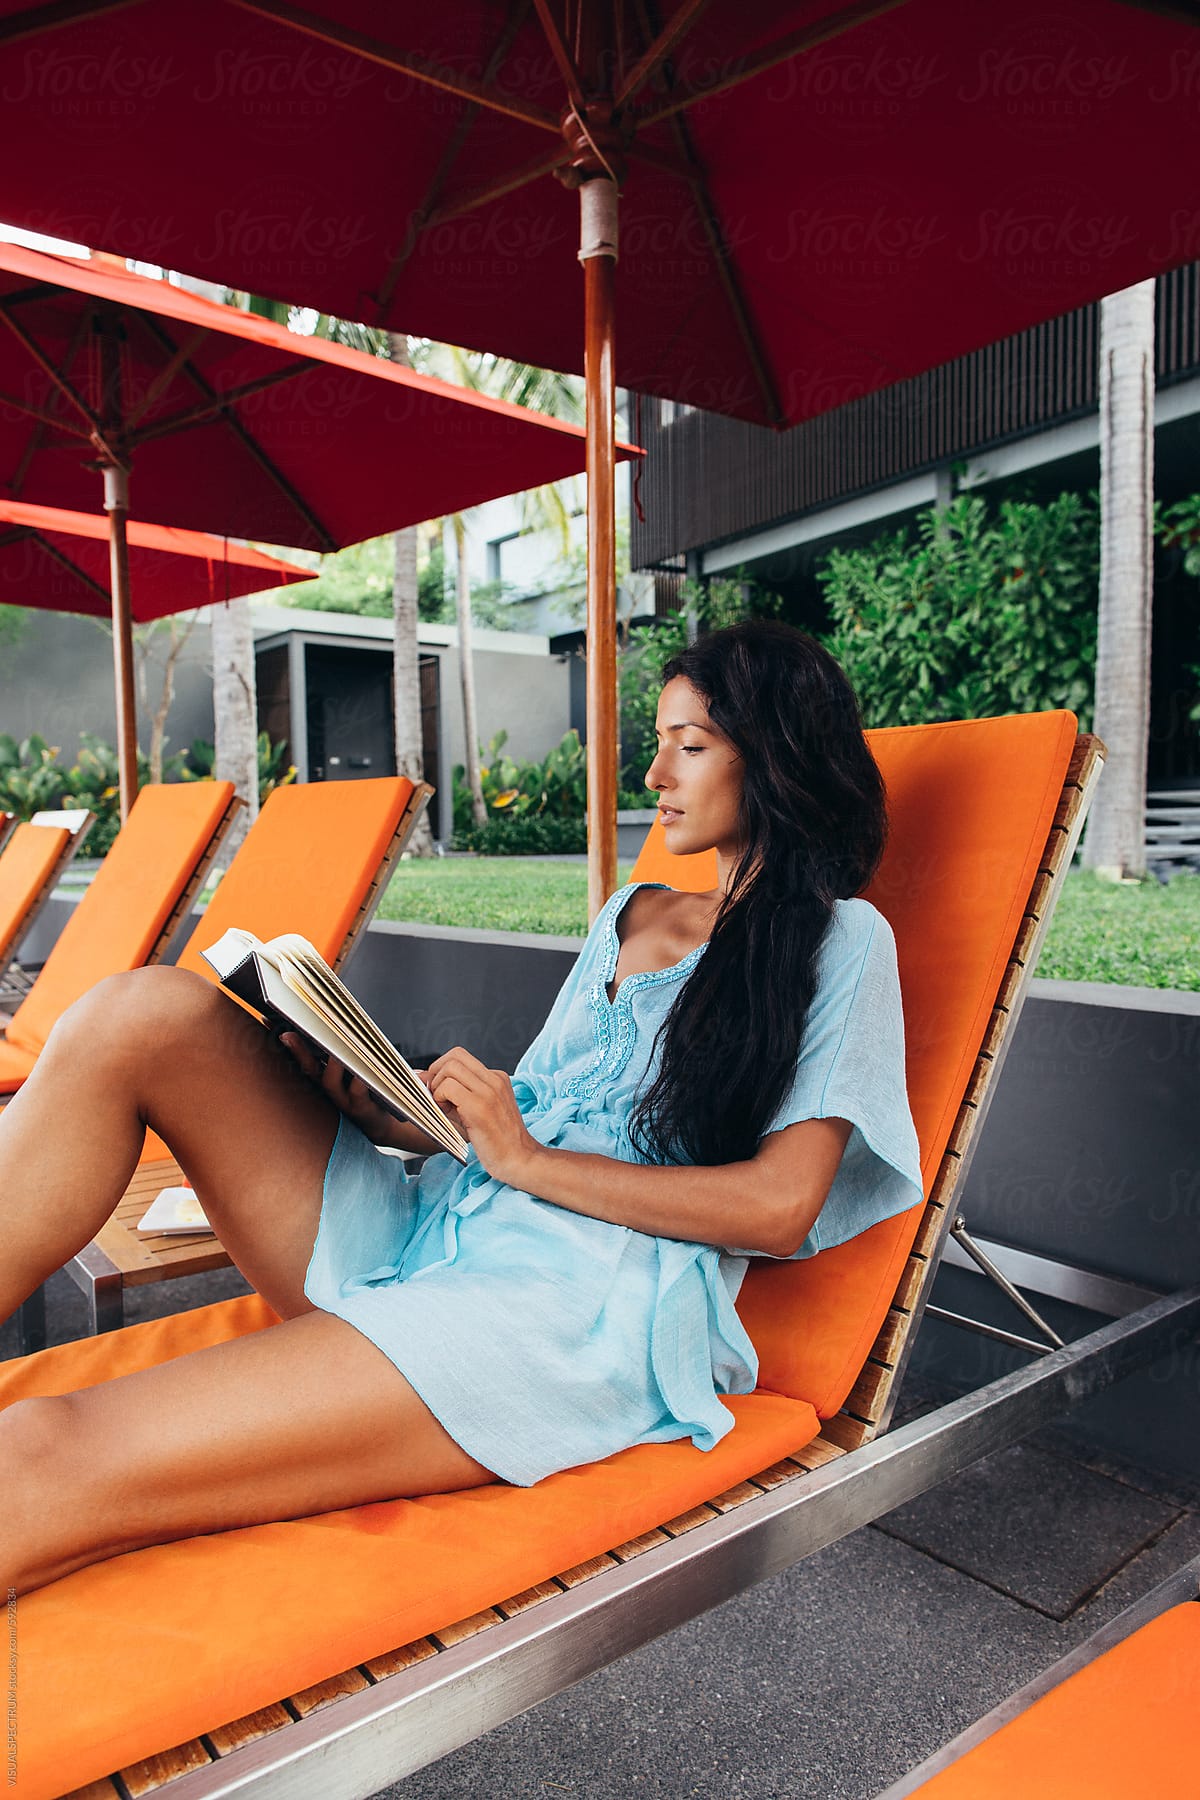 Pretty Long-Haired Woman Reading Book on Orange Sunbed